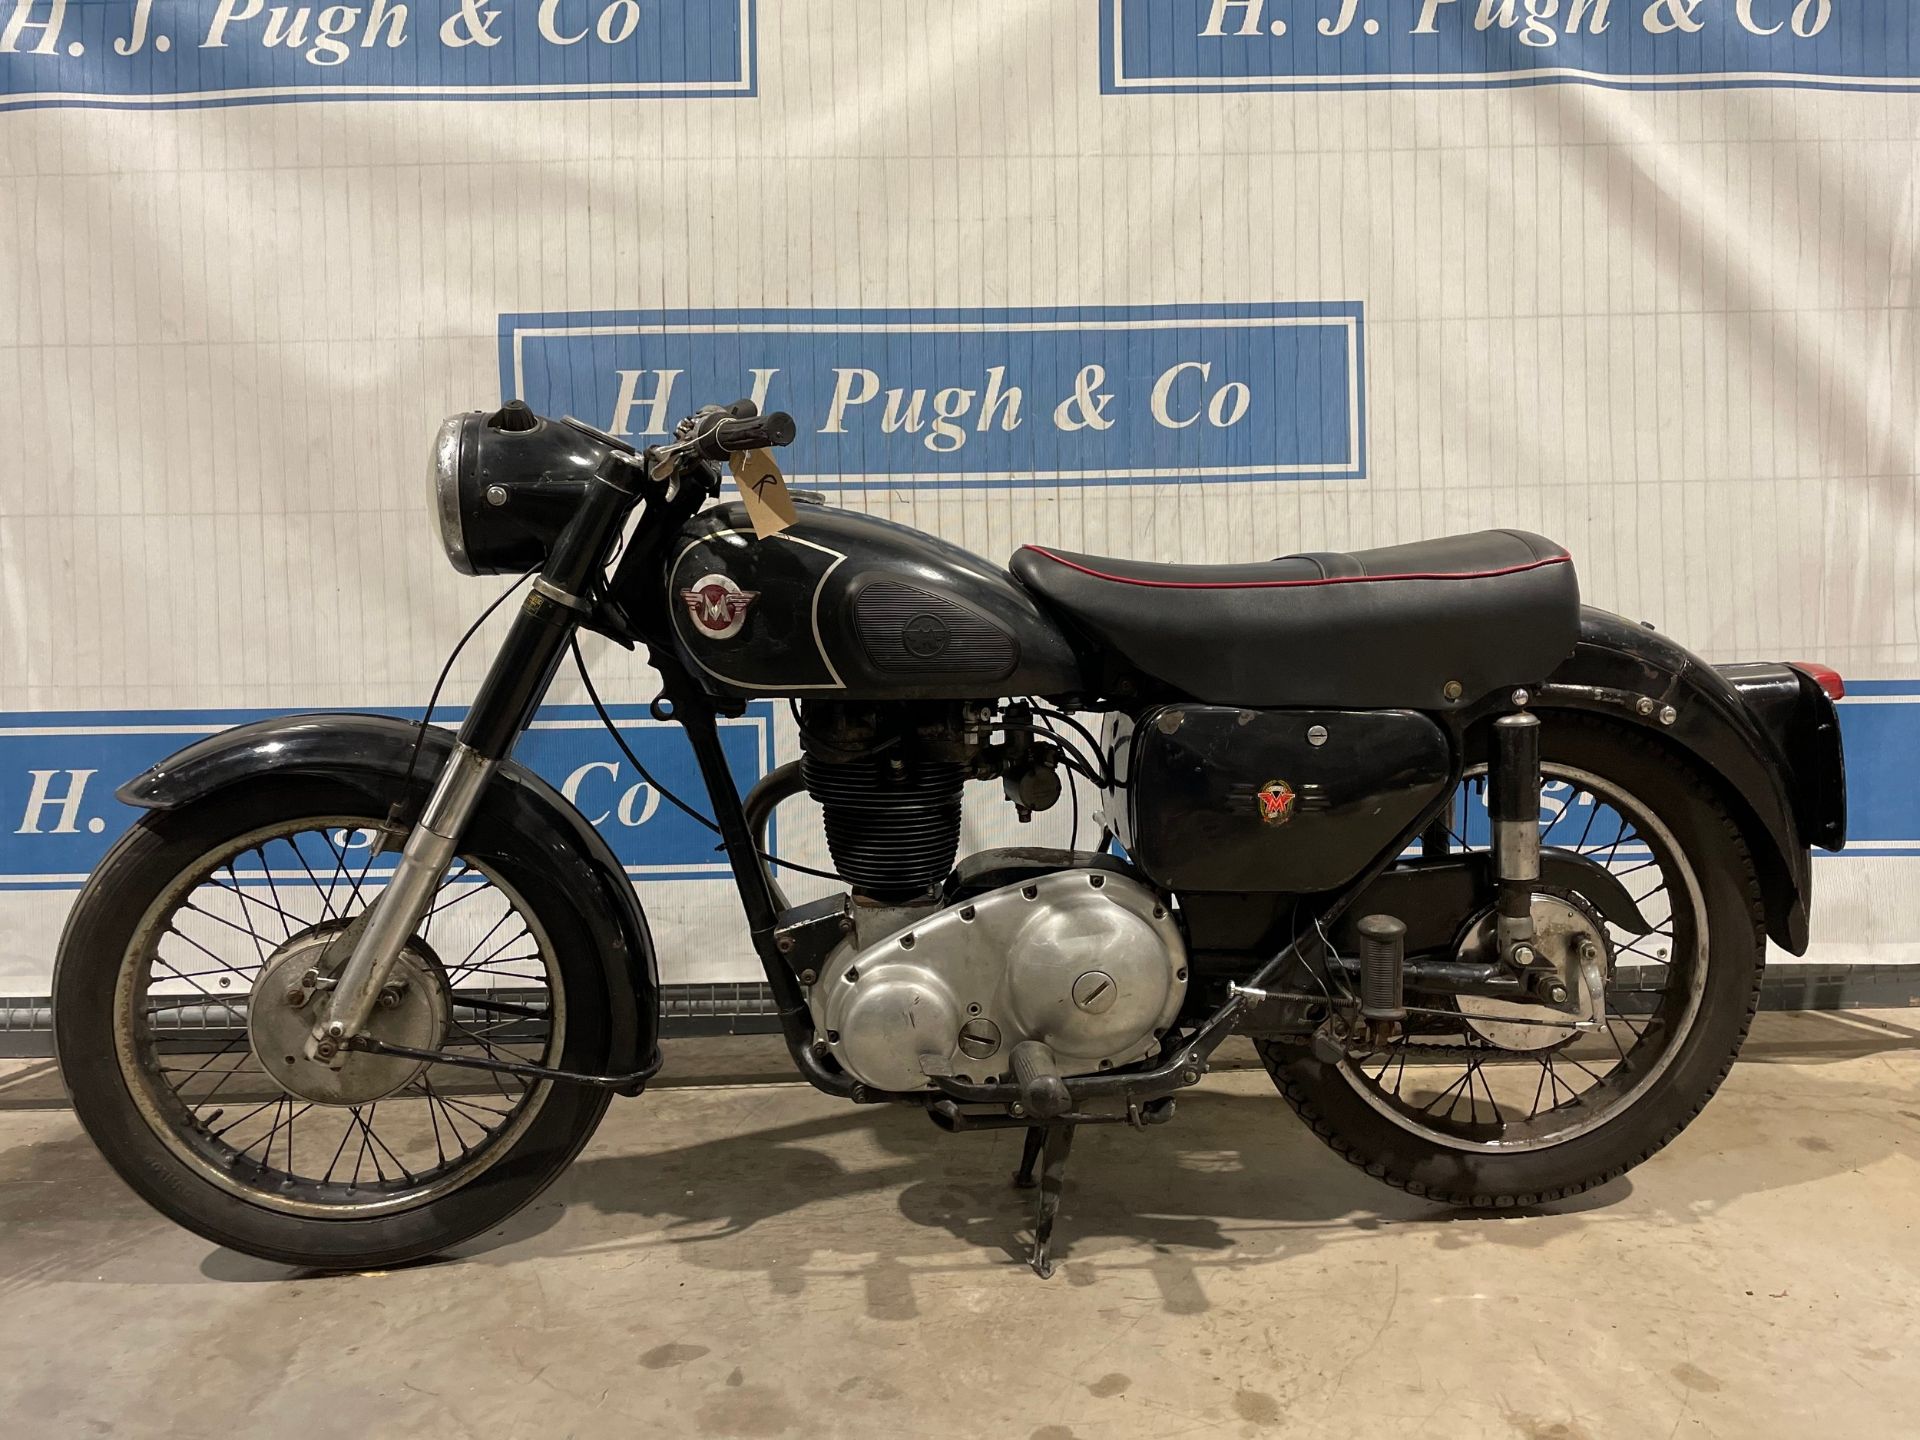 Matchless G3 motorcycle. 1958. 348cc. Has run recently but needs a new clutch. Reg 660 XVU. V5 - Image 11 of 12